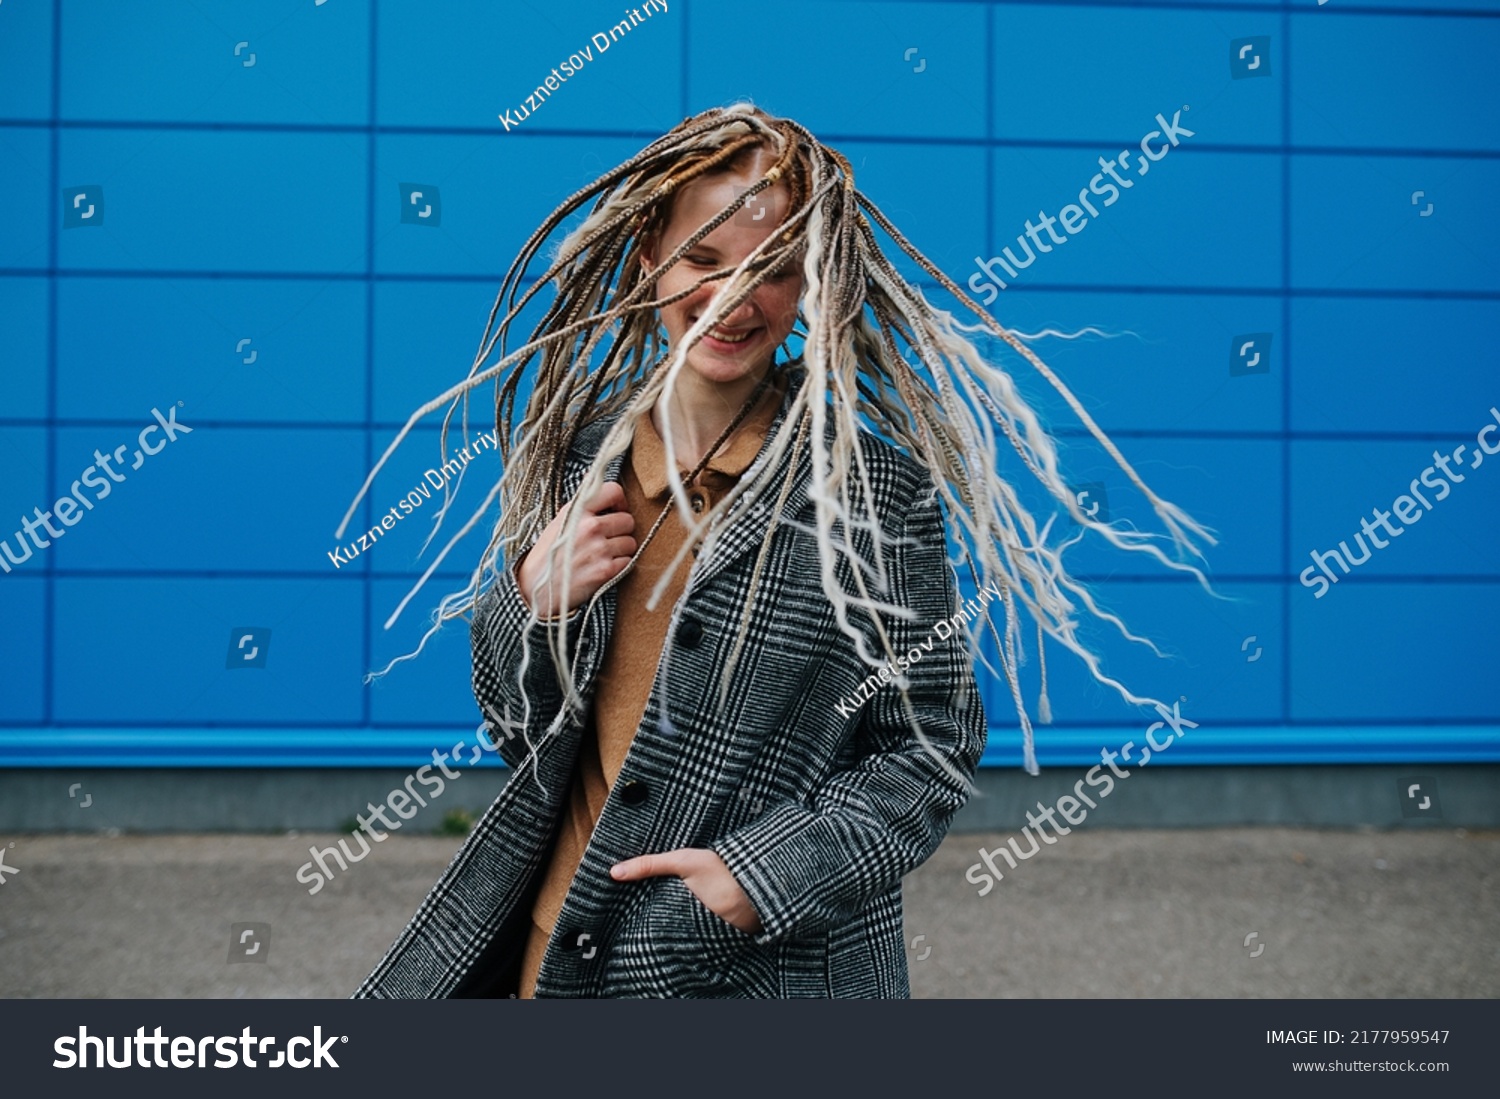 Shaking dreads lighthearted teenage girl in front of a blue panel wall covering. She is wearing a grey checkered jacket. Portrait. #2177959547